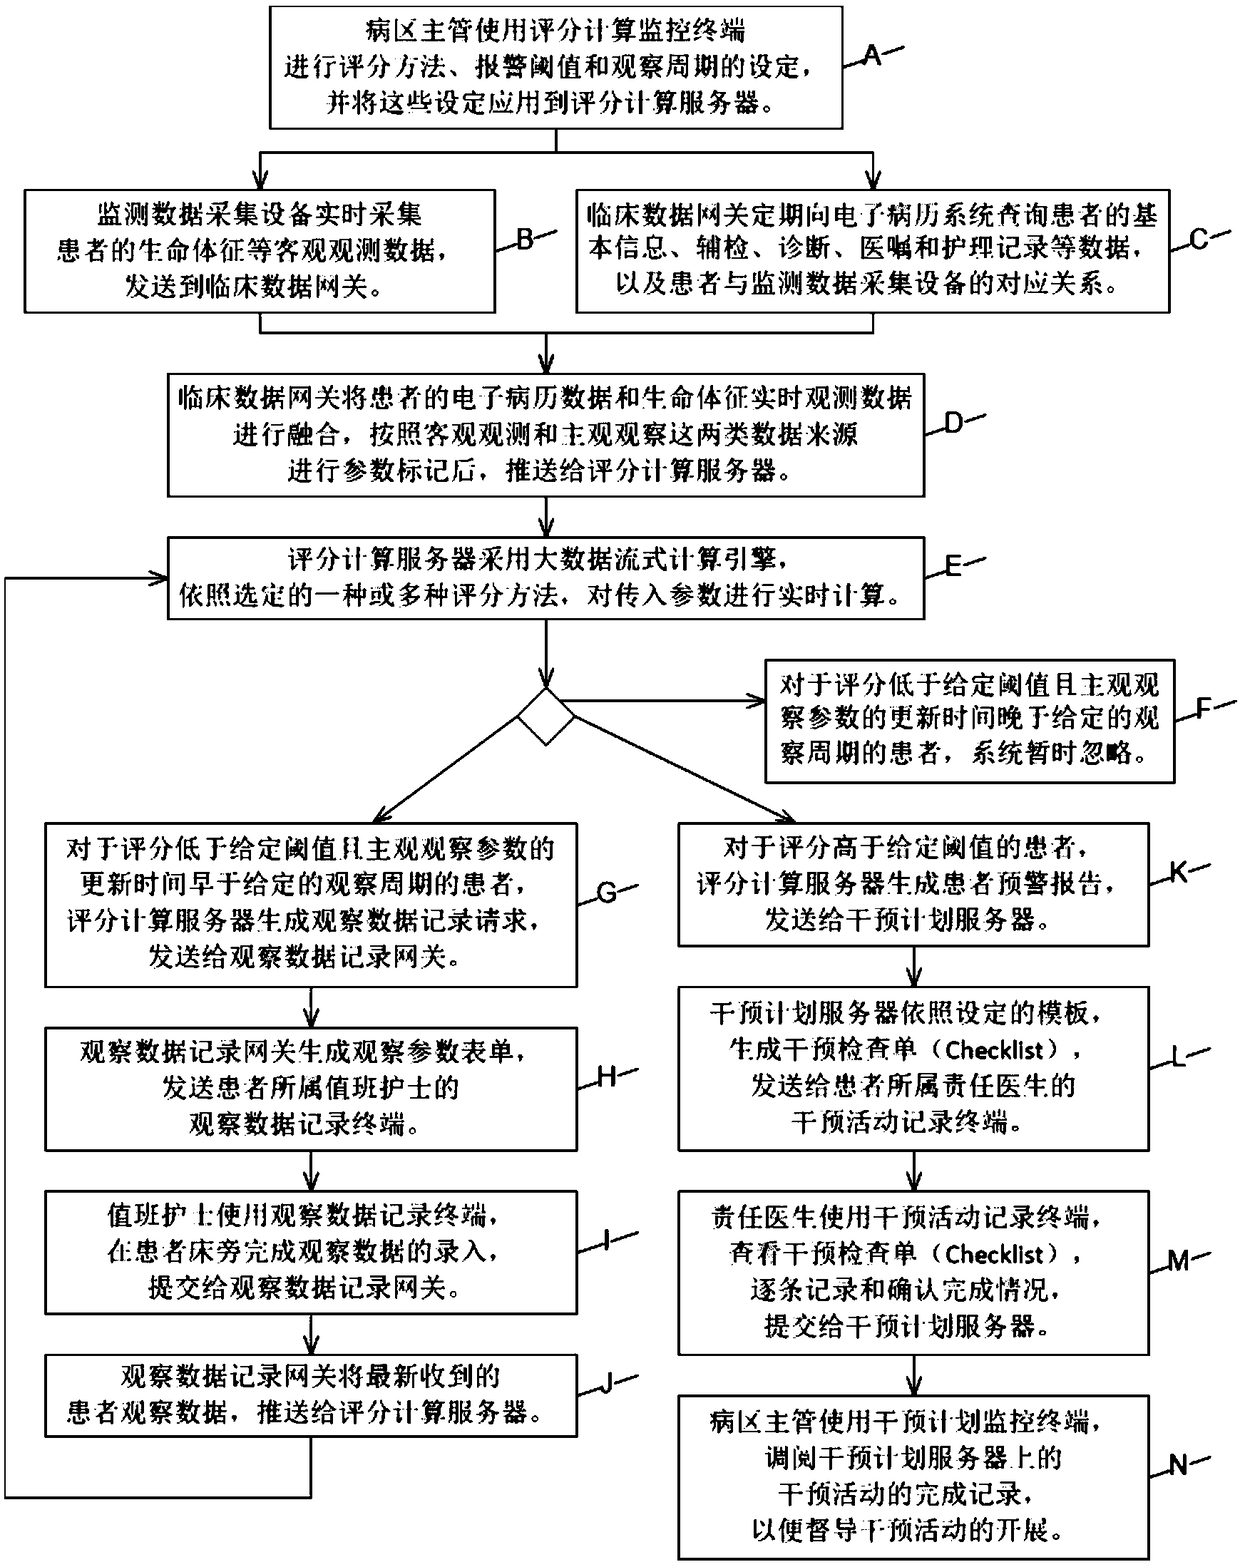 Man-machine cooperation system and method for disease early warning and intervention management